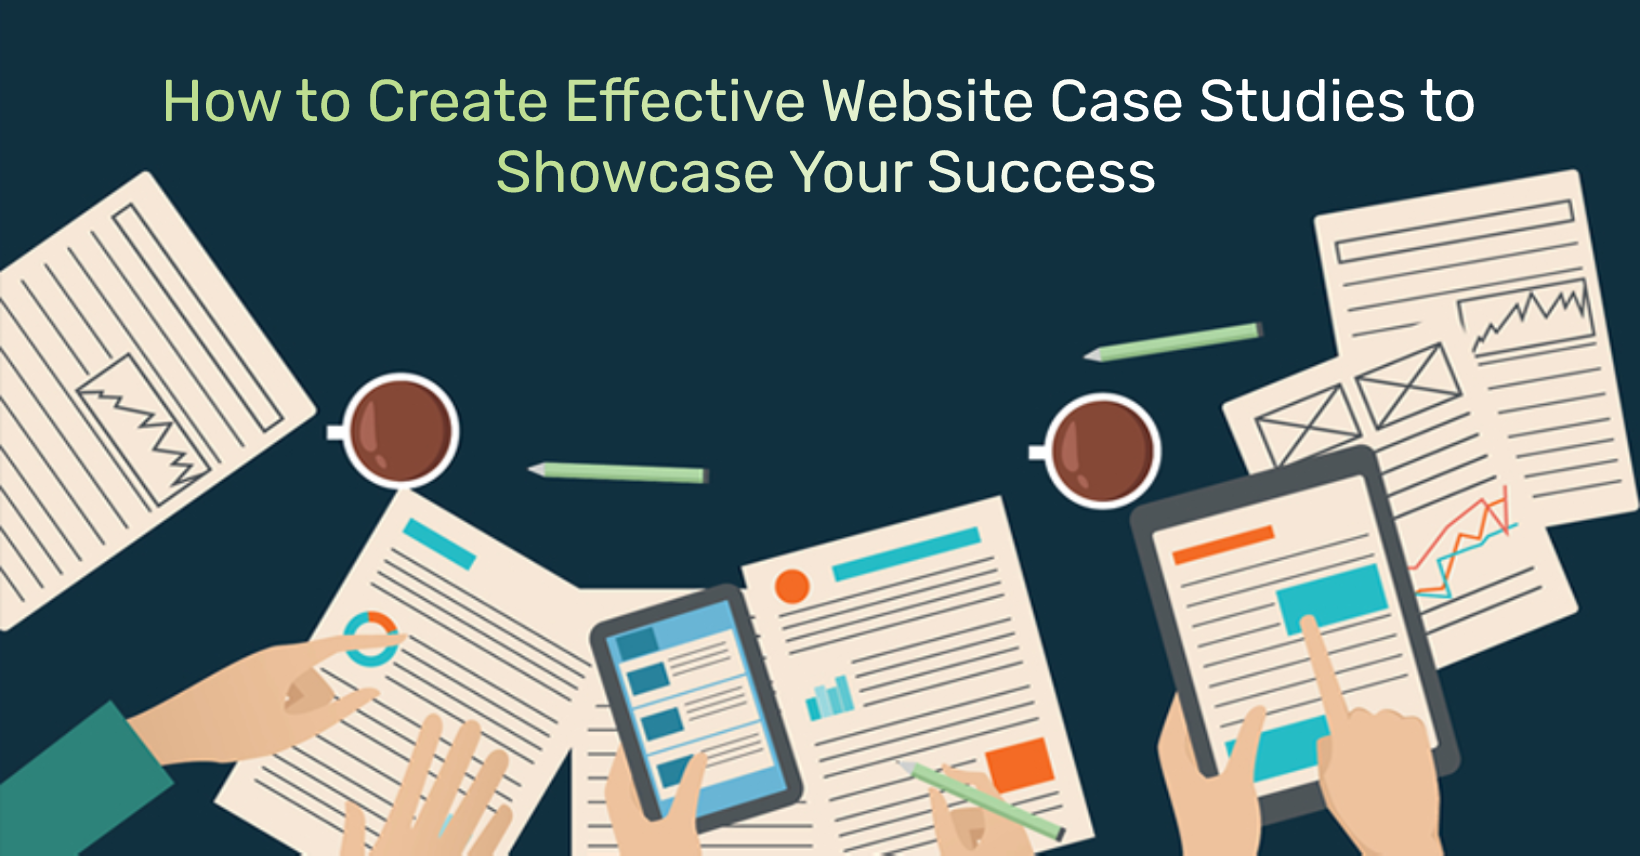 How to Create Effective Website Case Studies to Showcase Your Success